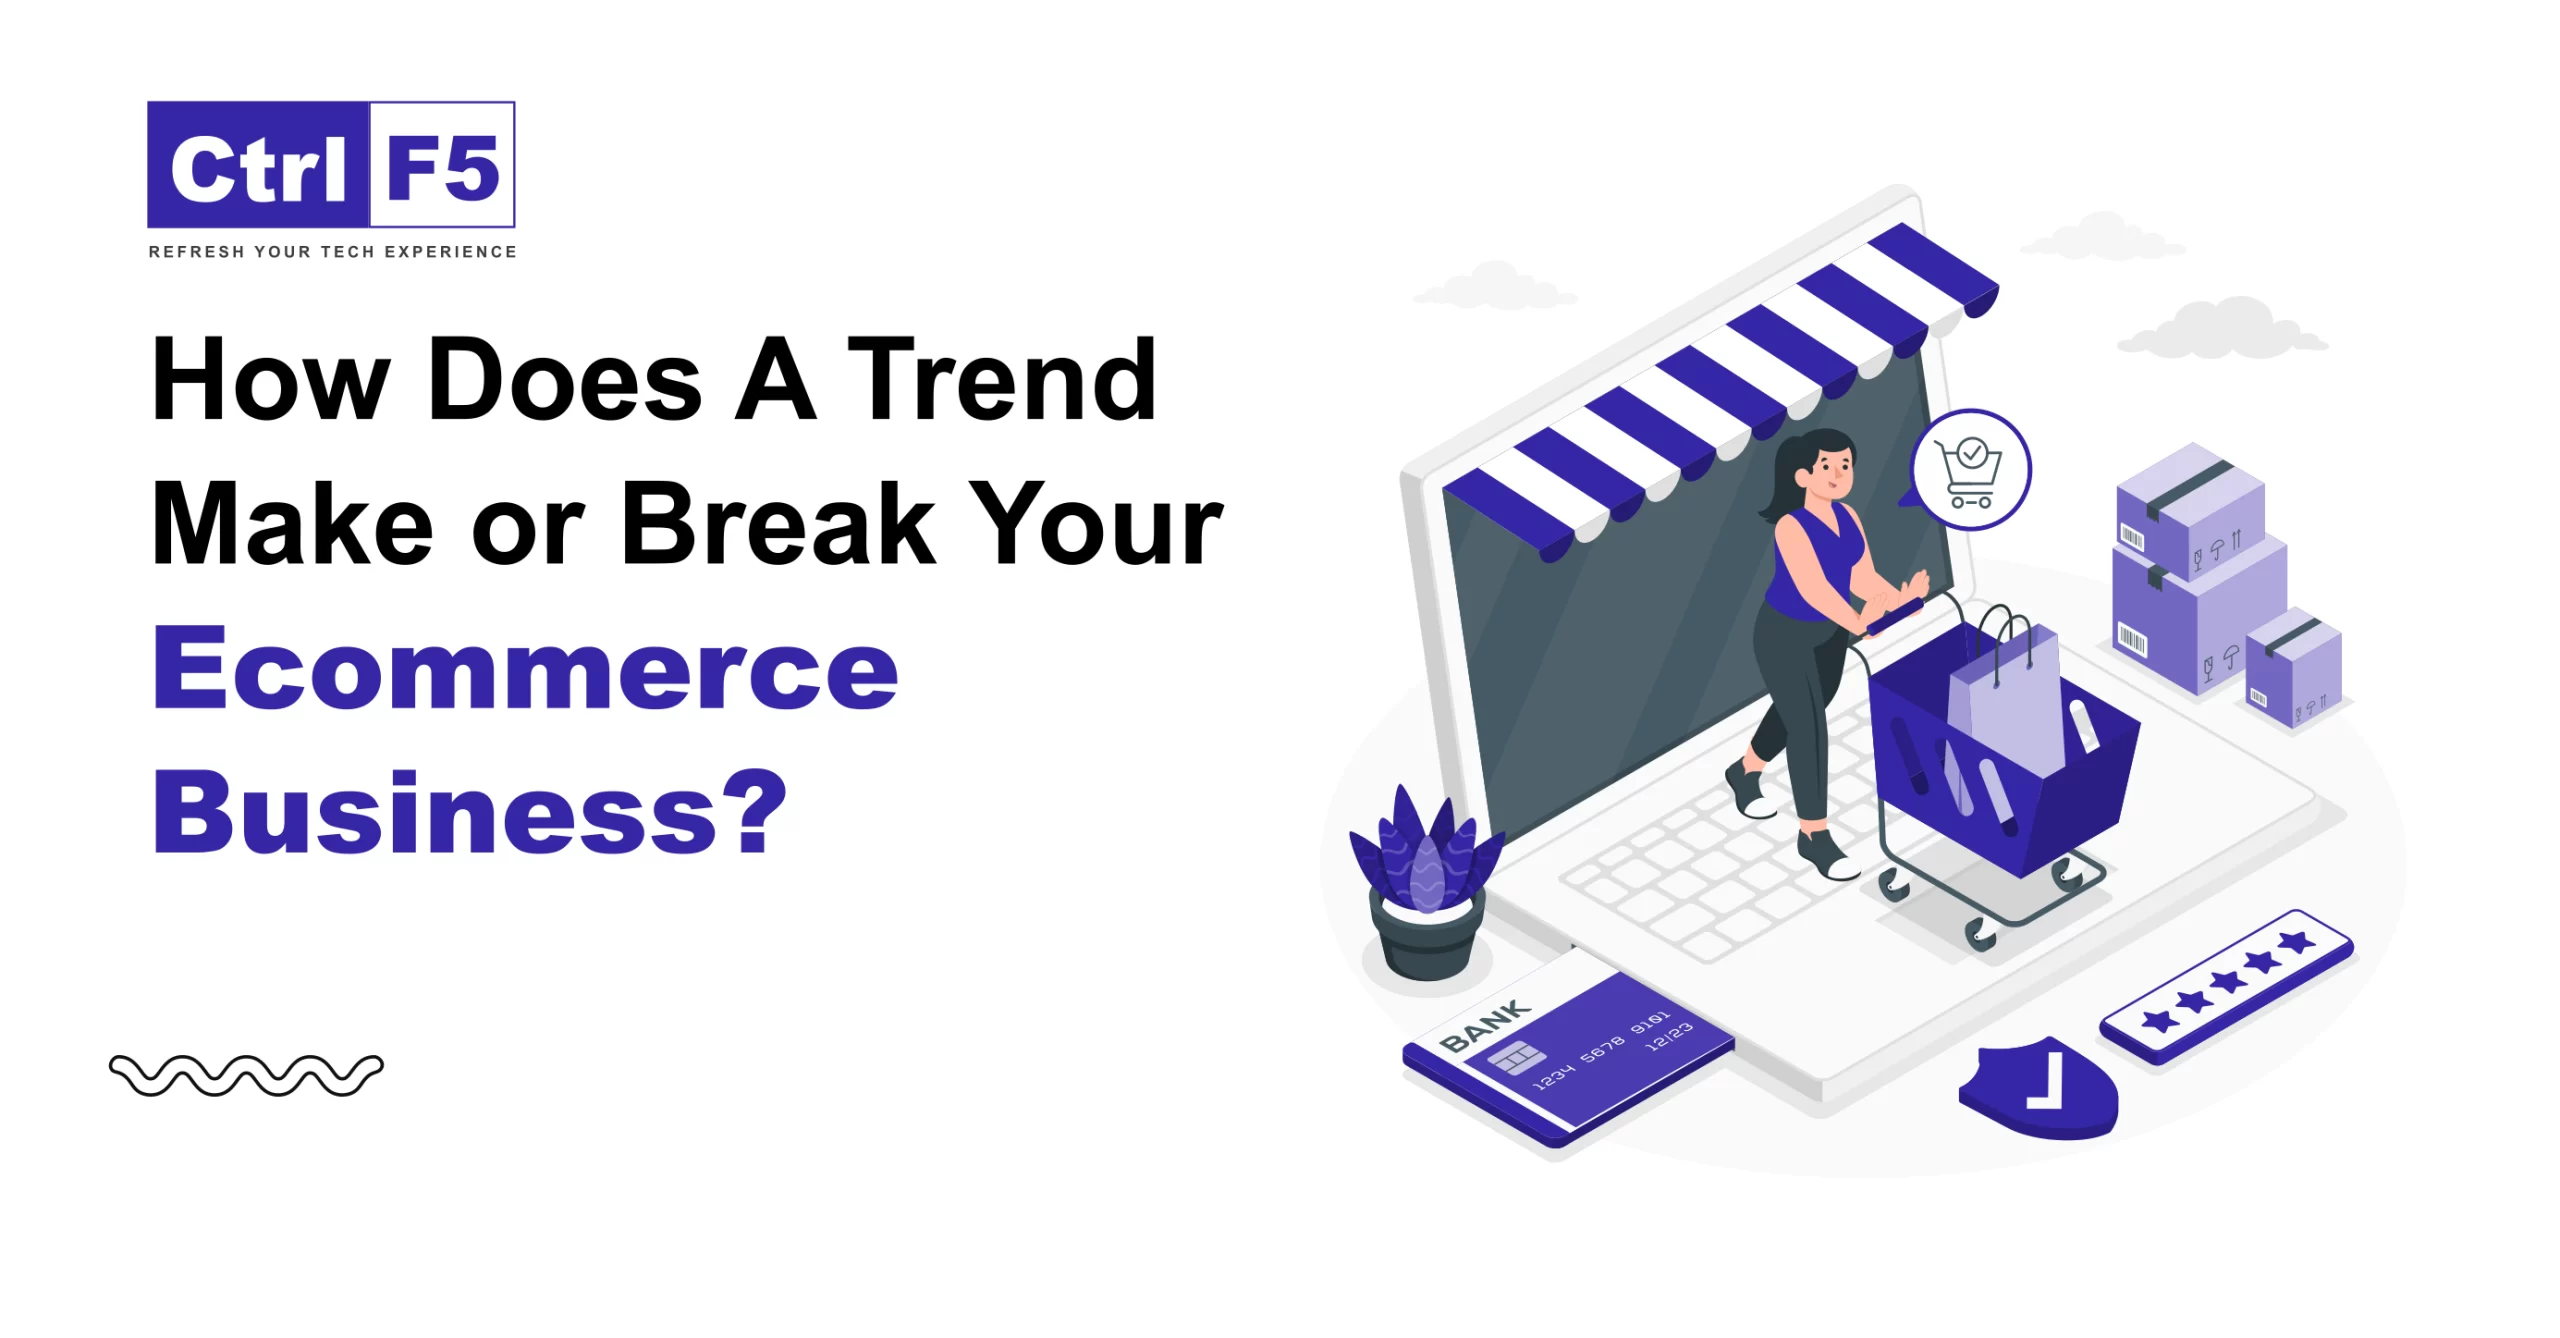 How Does A Trend Make or Break Your Ecommerce Business?